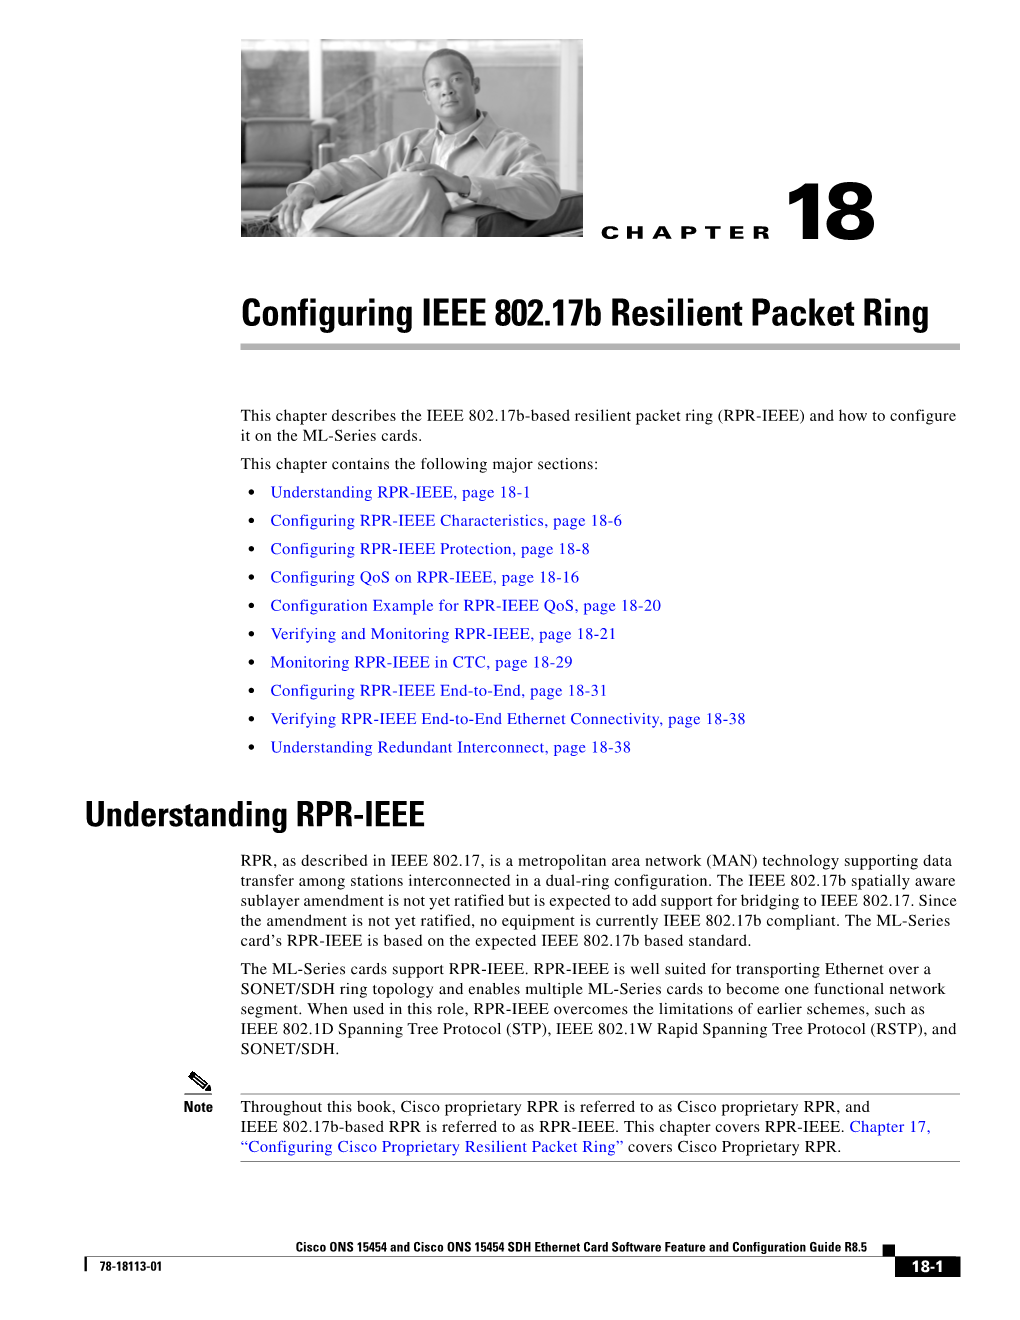 Configuring IEEE 802.17B Resilient Packet Ring